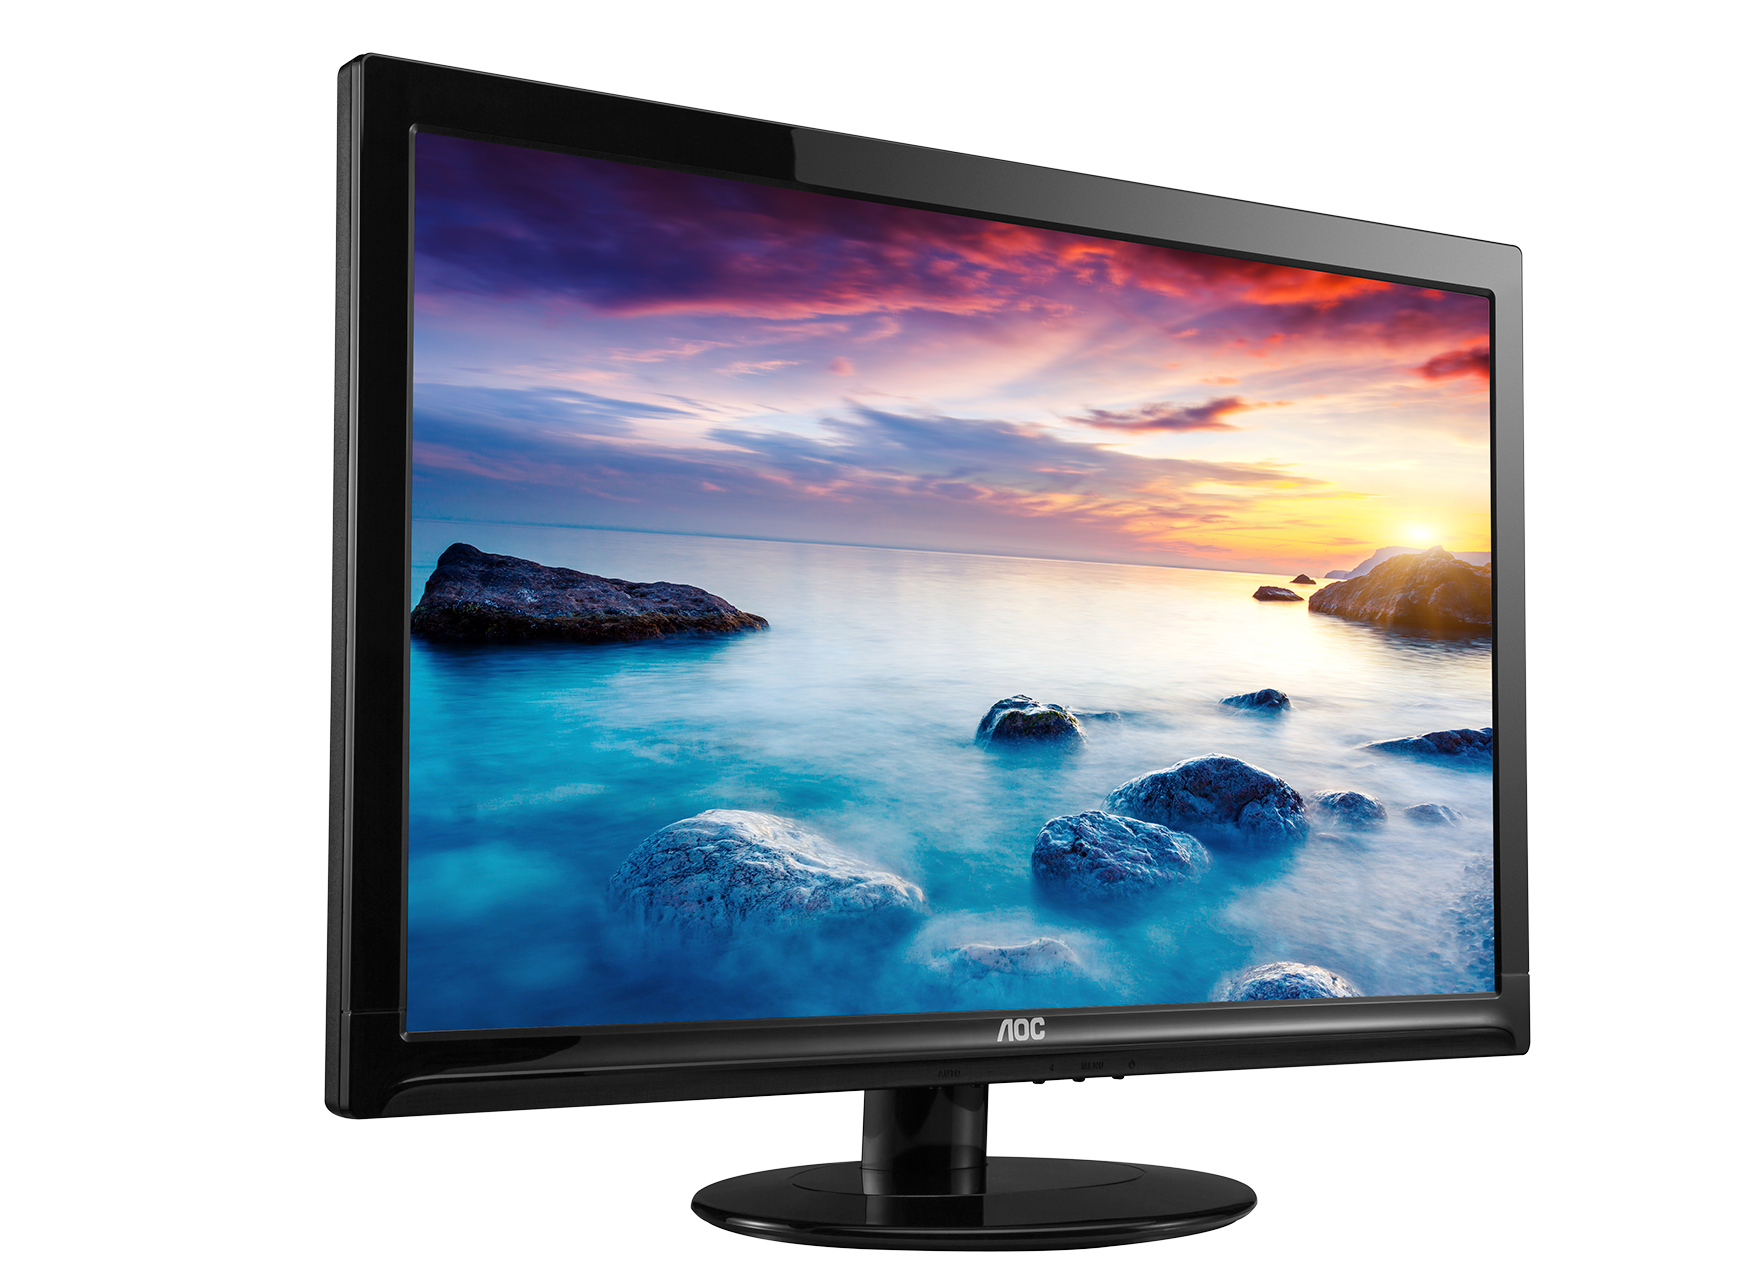 Monitor LCD PNG HD Quality